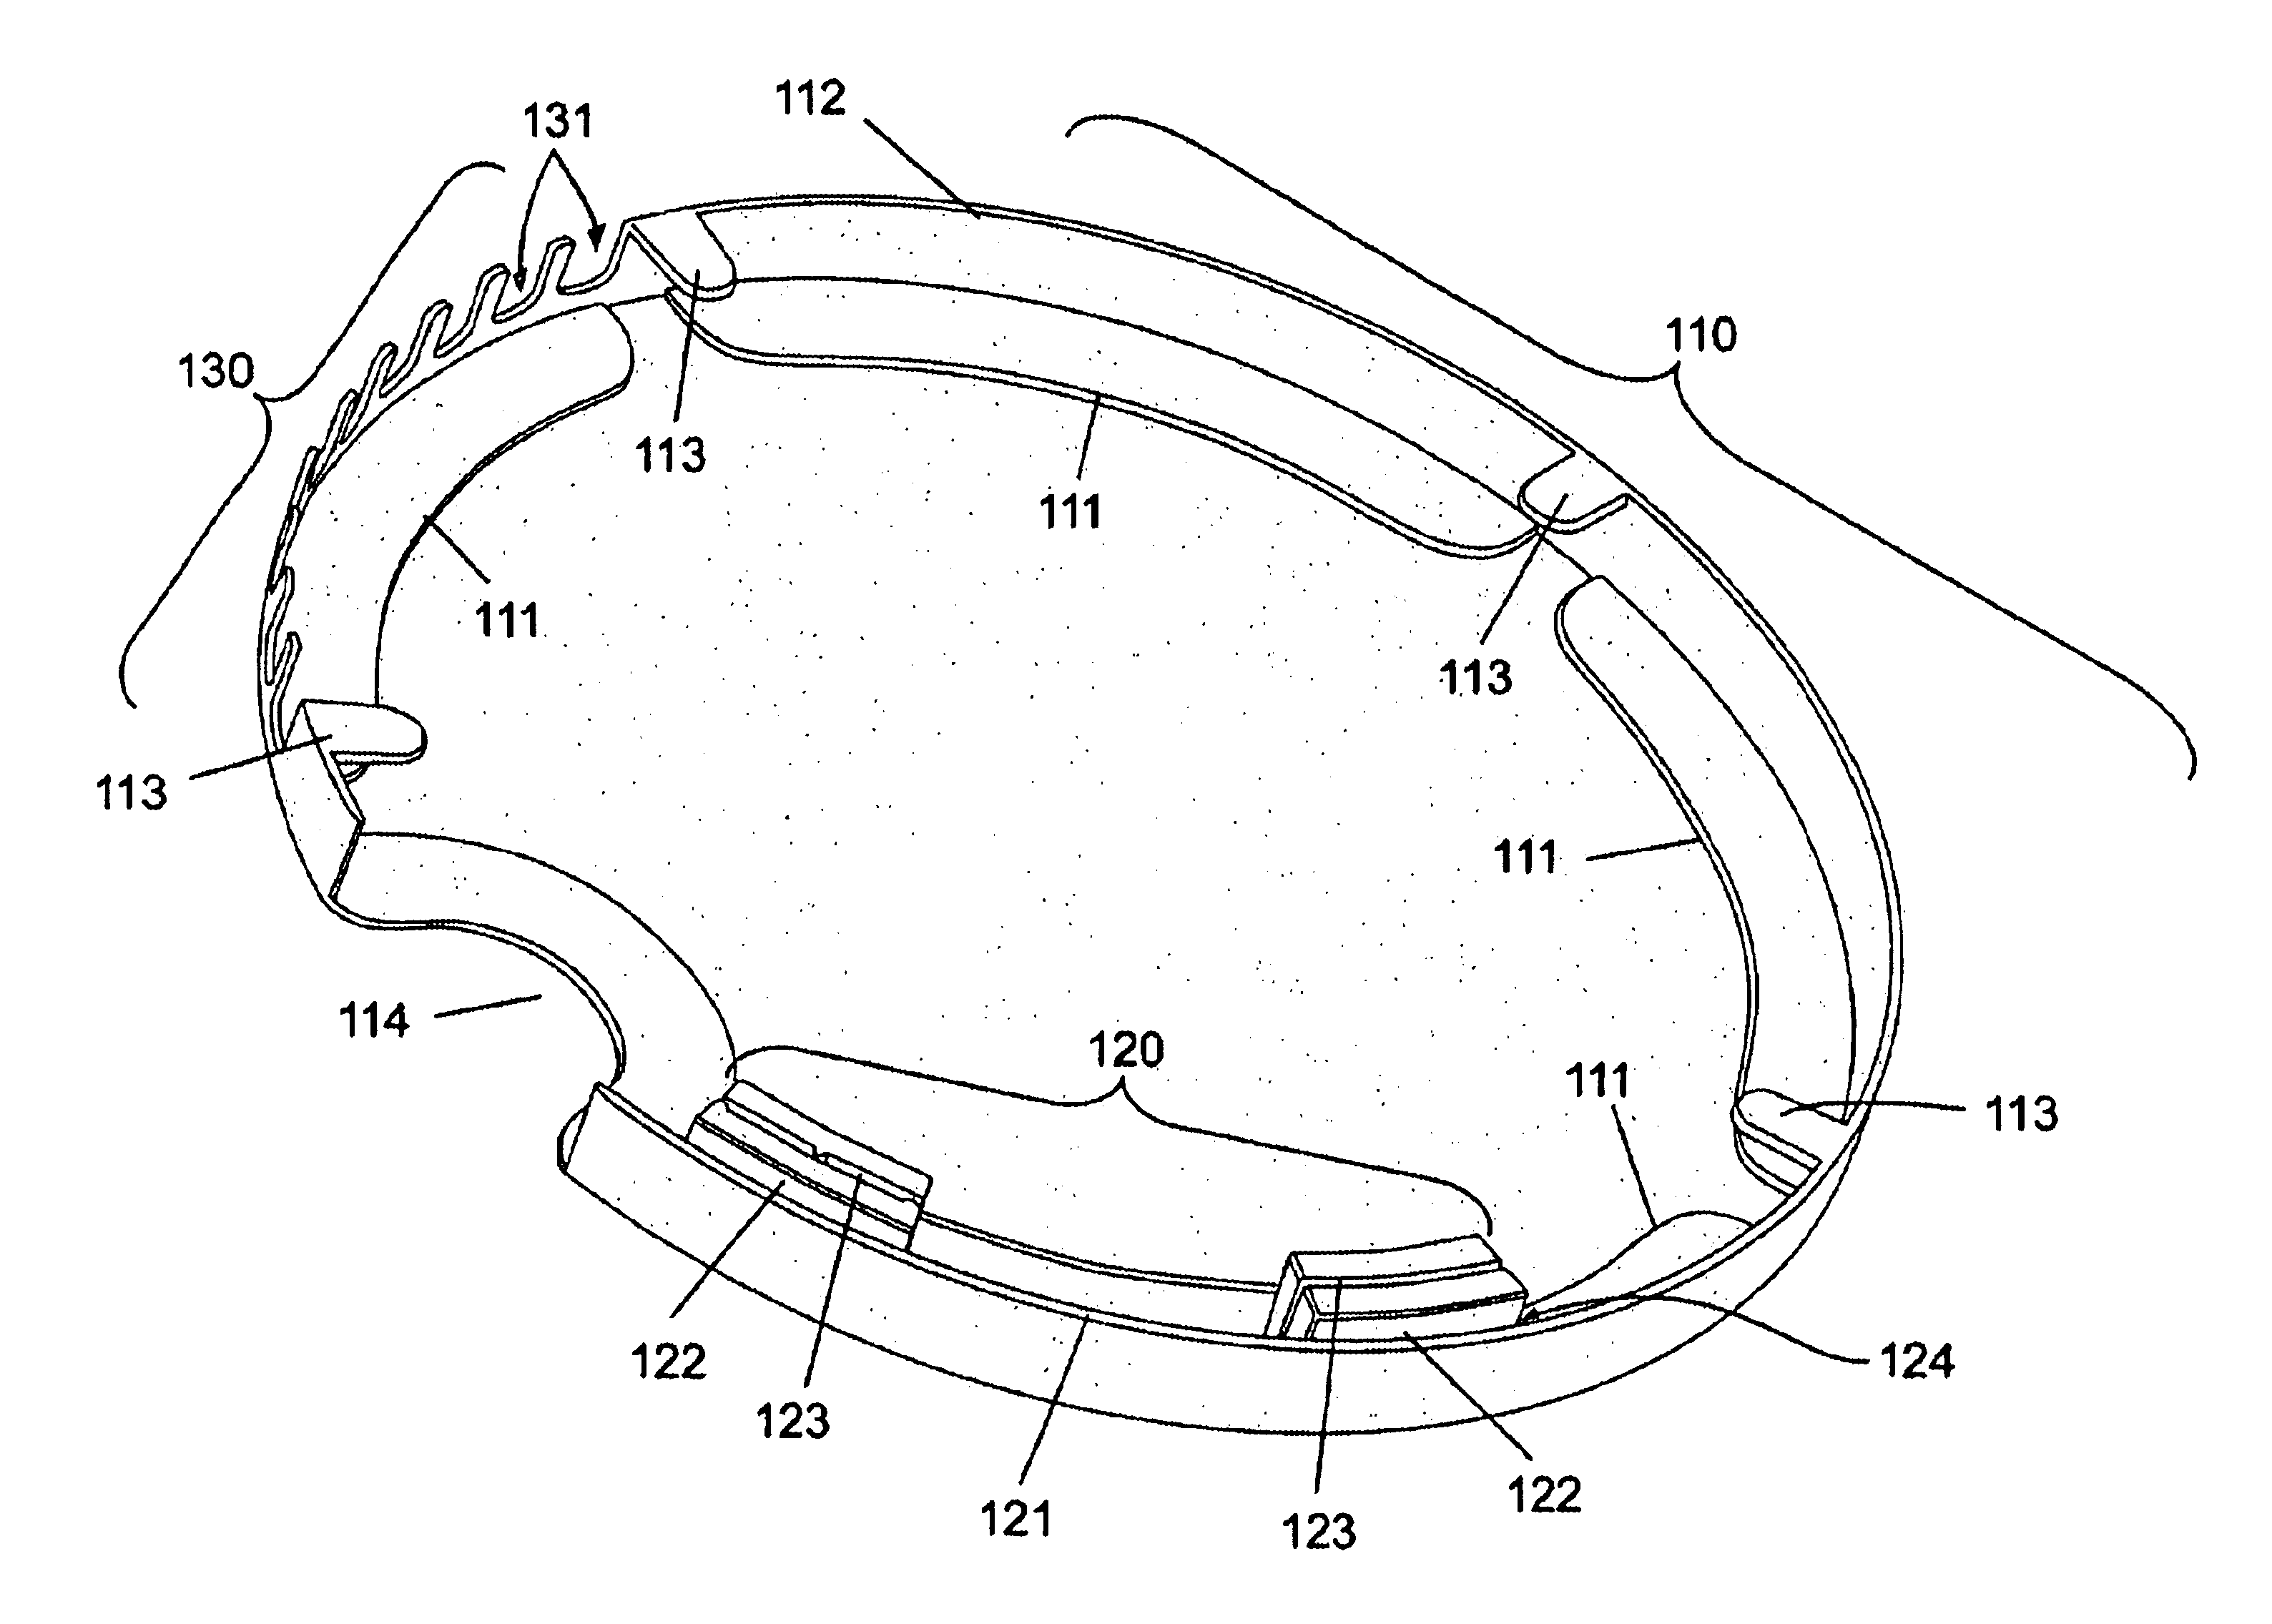 Packaging device for a catheter assembly